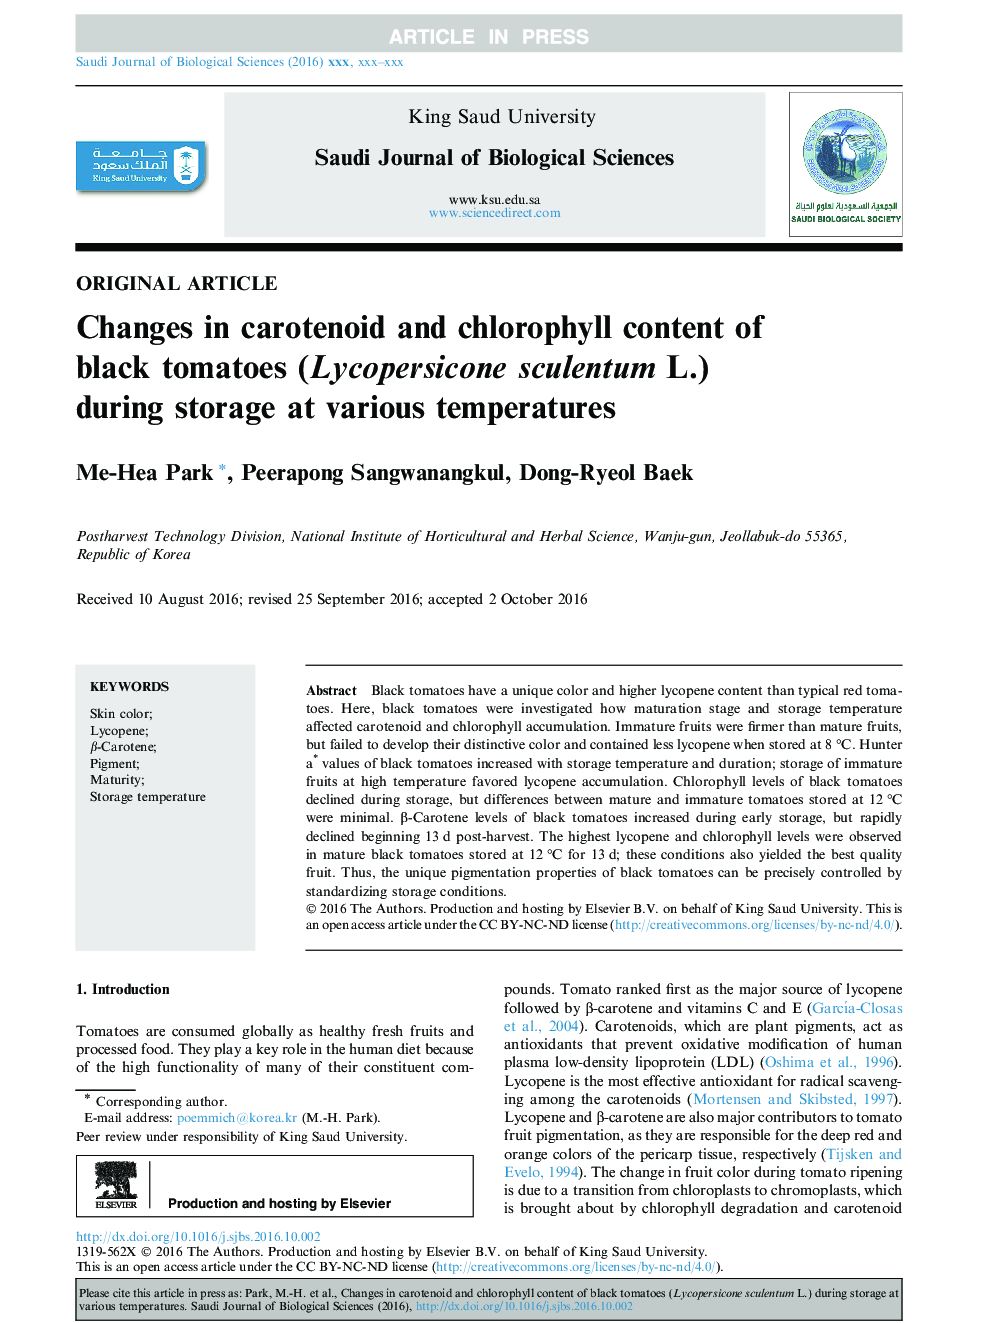 Changes in carotenoid and chlorophyll content of black tomatoes (Lycopersicone sculentum L.) during storage at various temperatures